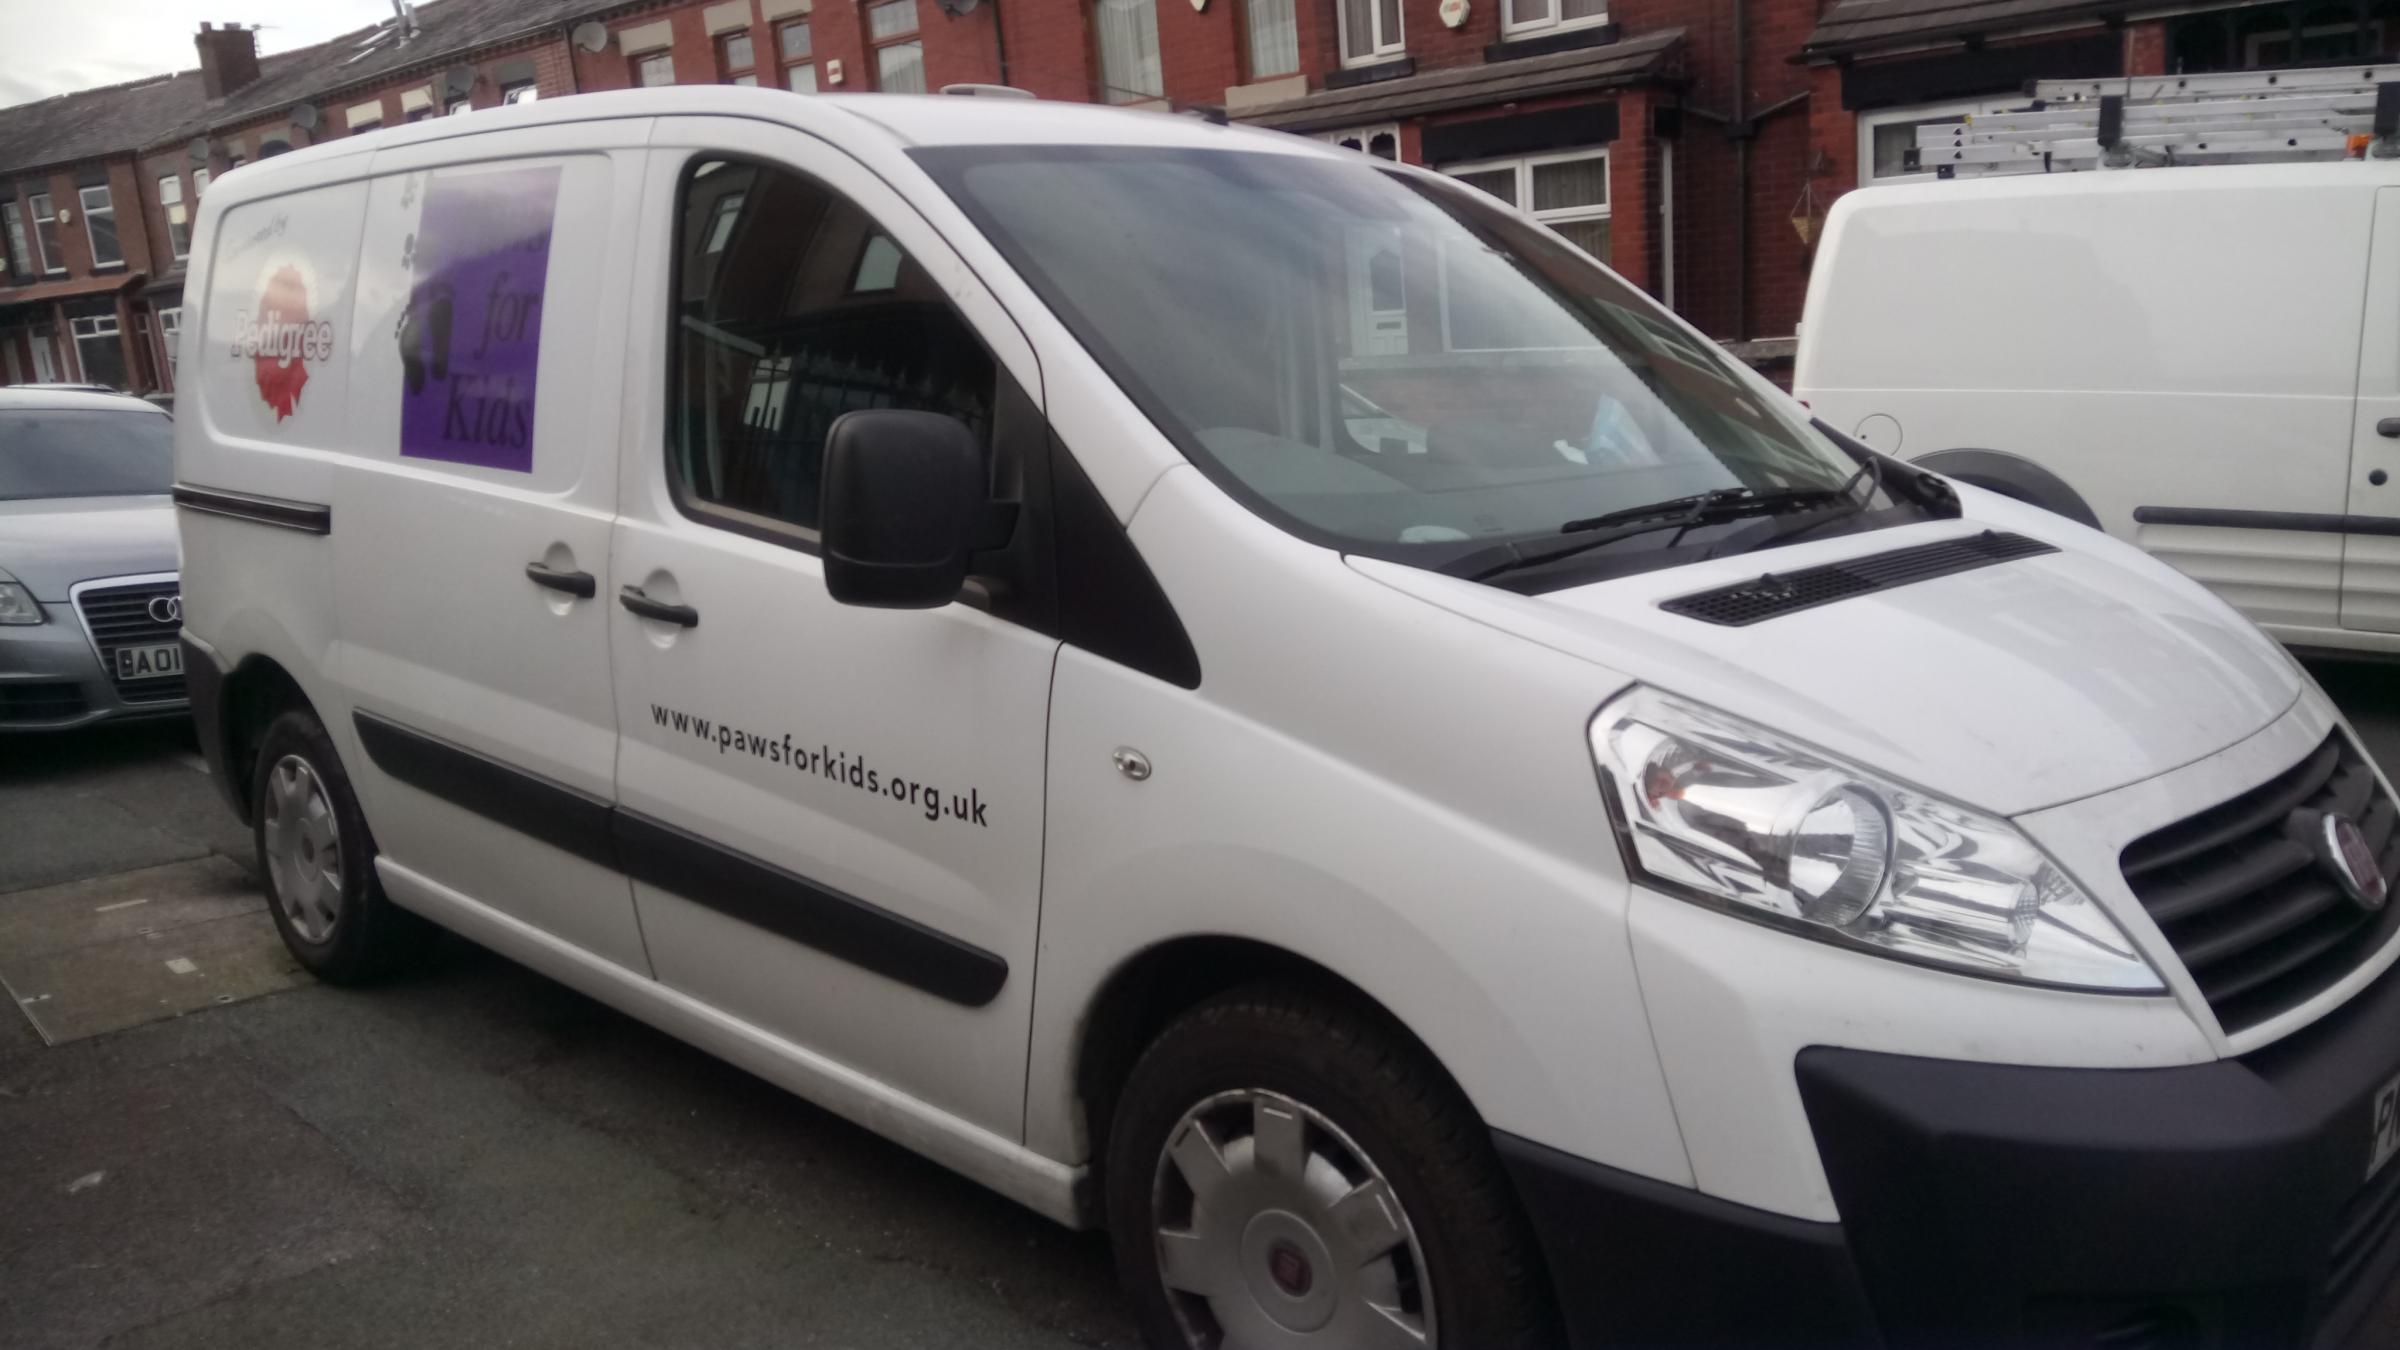 Domestic abuse charity’s drive to get new set of wheels